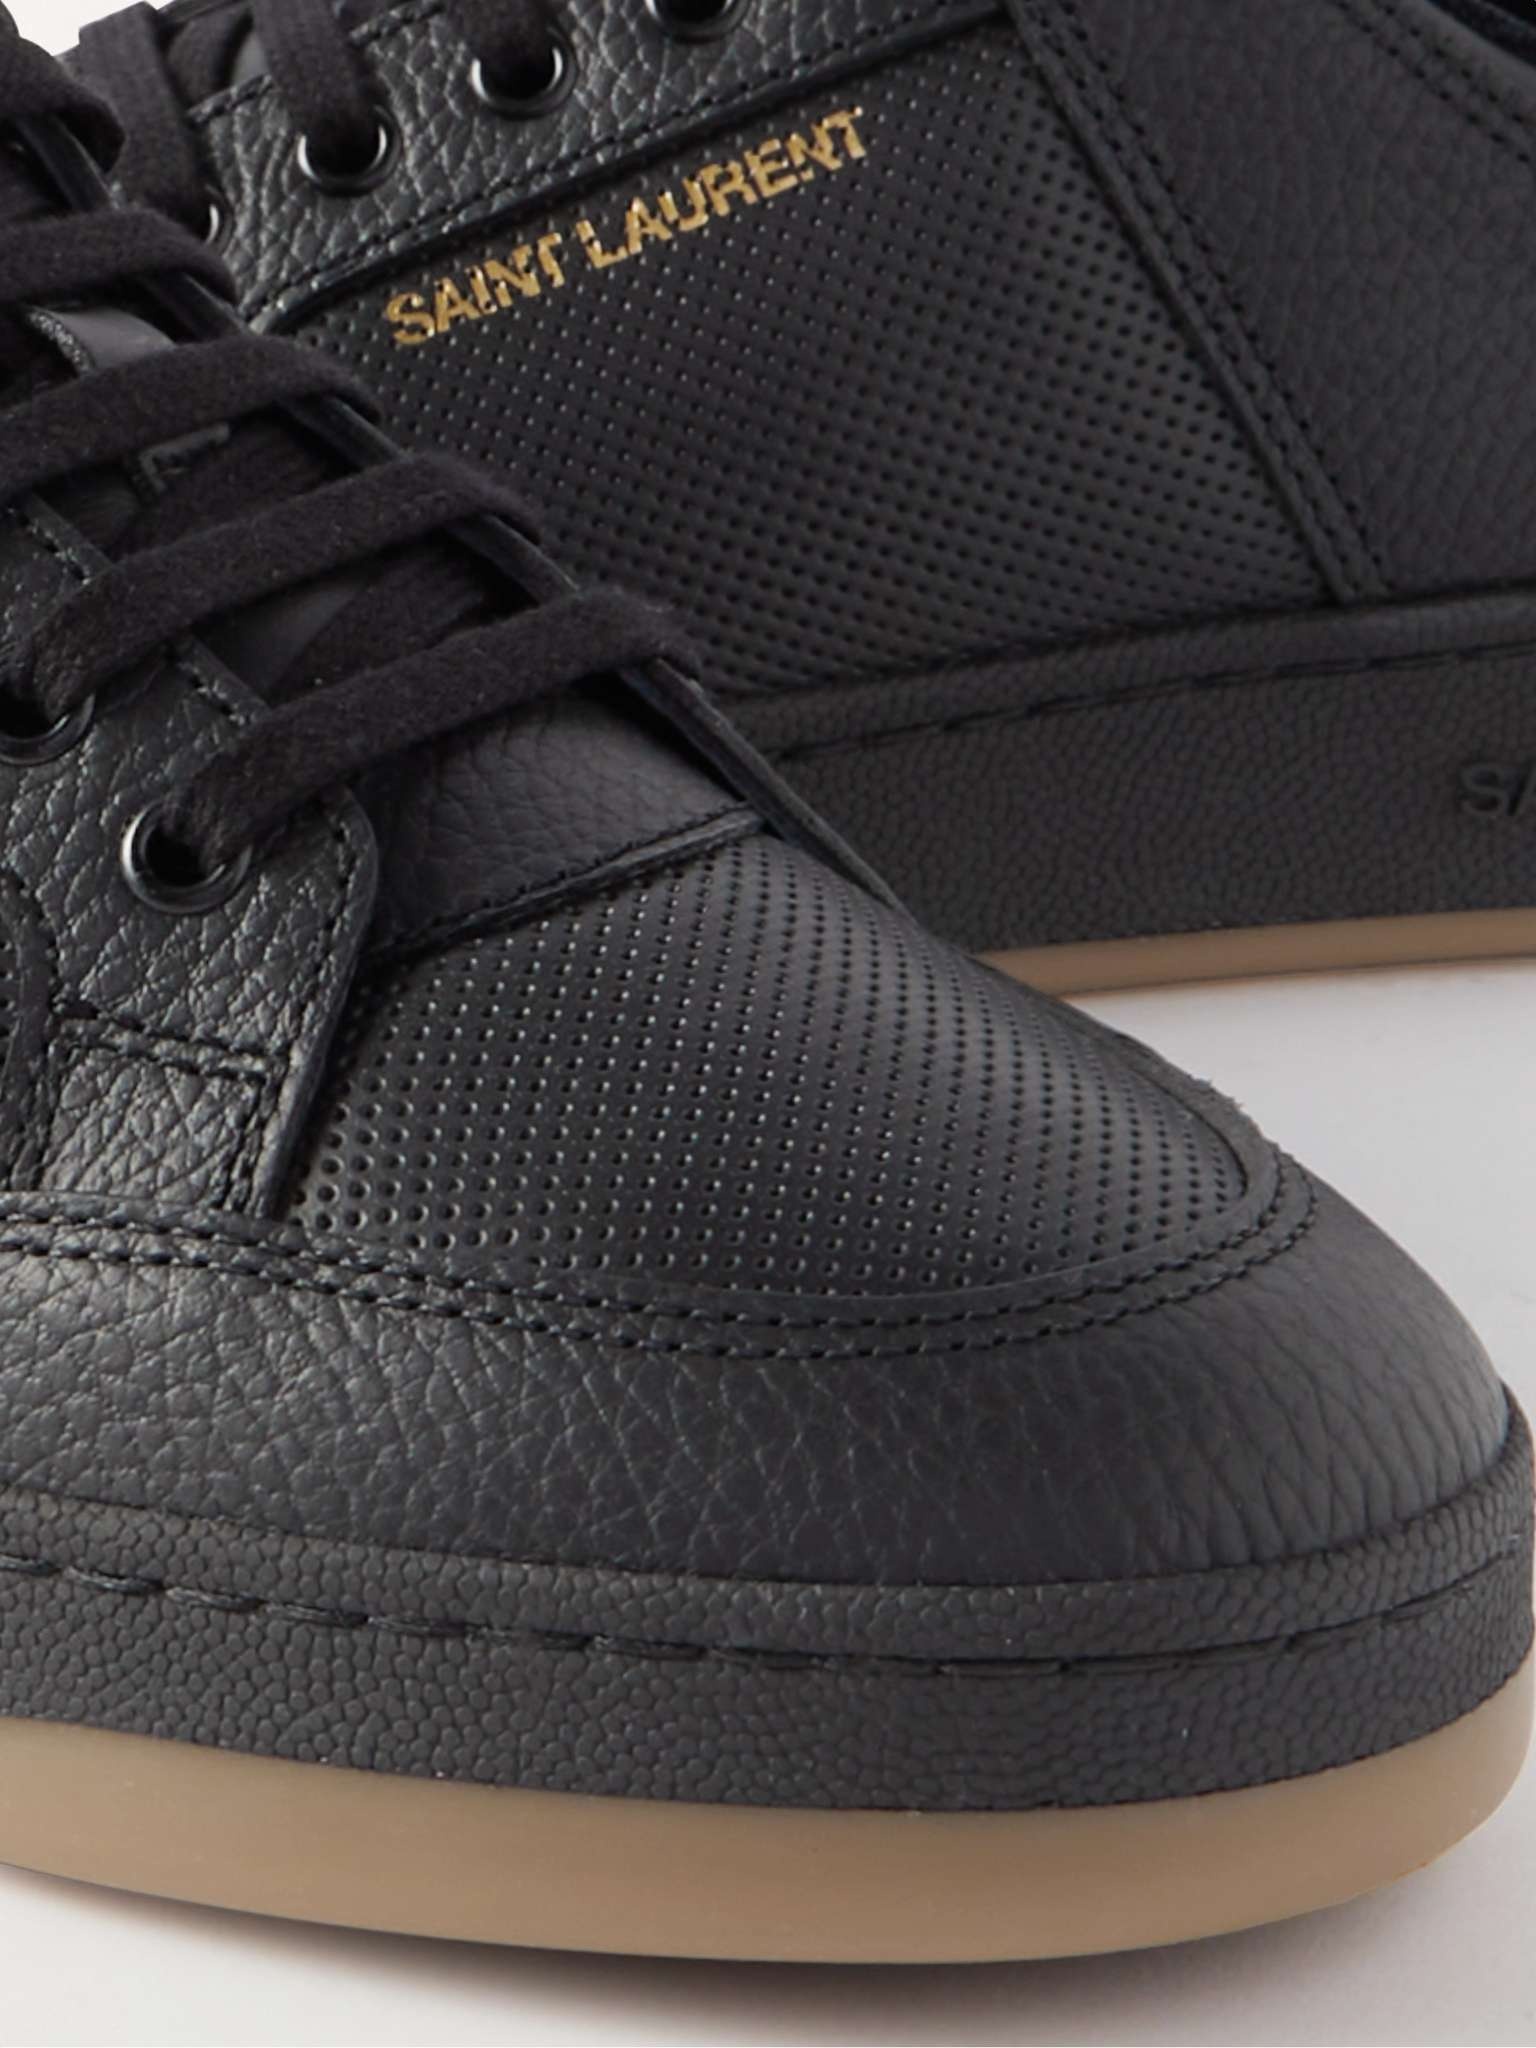 SL/61 Perforated Leather Sneakers - 6